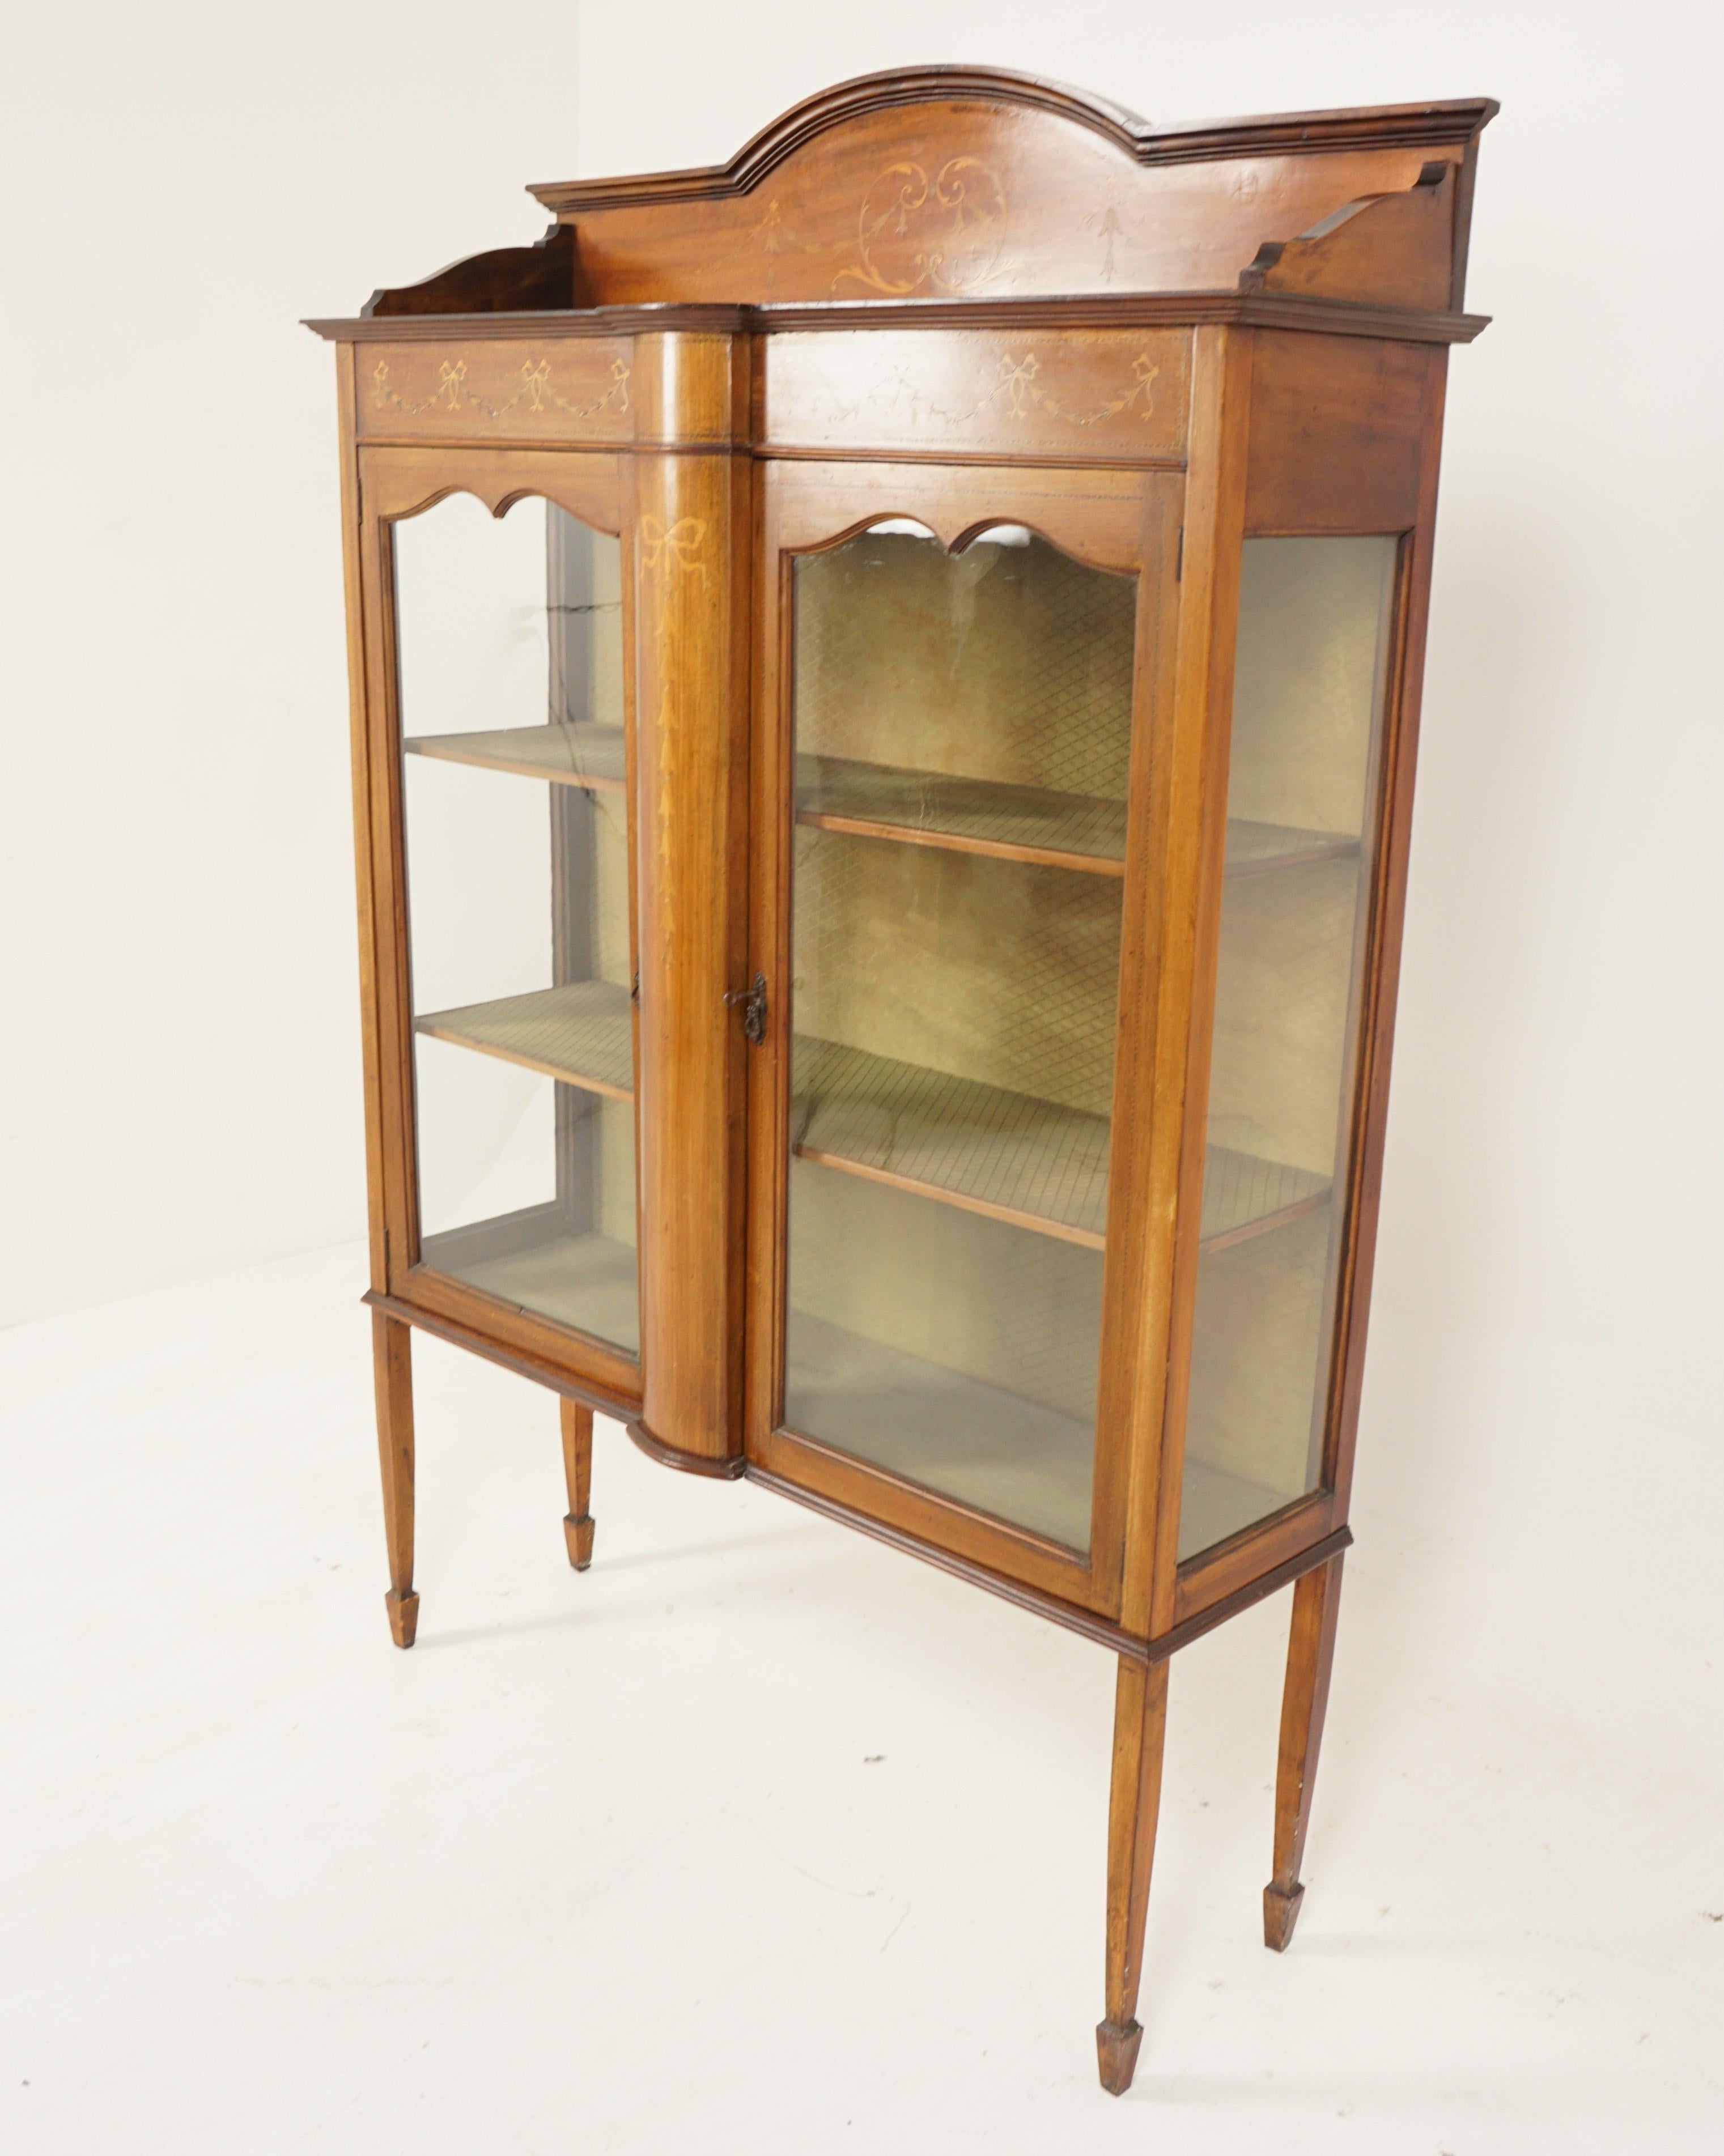 Antique Edwardian inlaid walnut display China cabinet, Scotland 1910, B2868

Scotland 1910
Solid walnut & veneer
Original finish
Three quarter inlaid gallery to the top
Inlaid frieze underneath
Pair of original glass doors open to reveal two